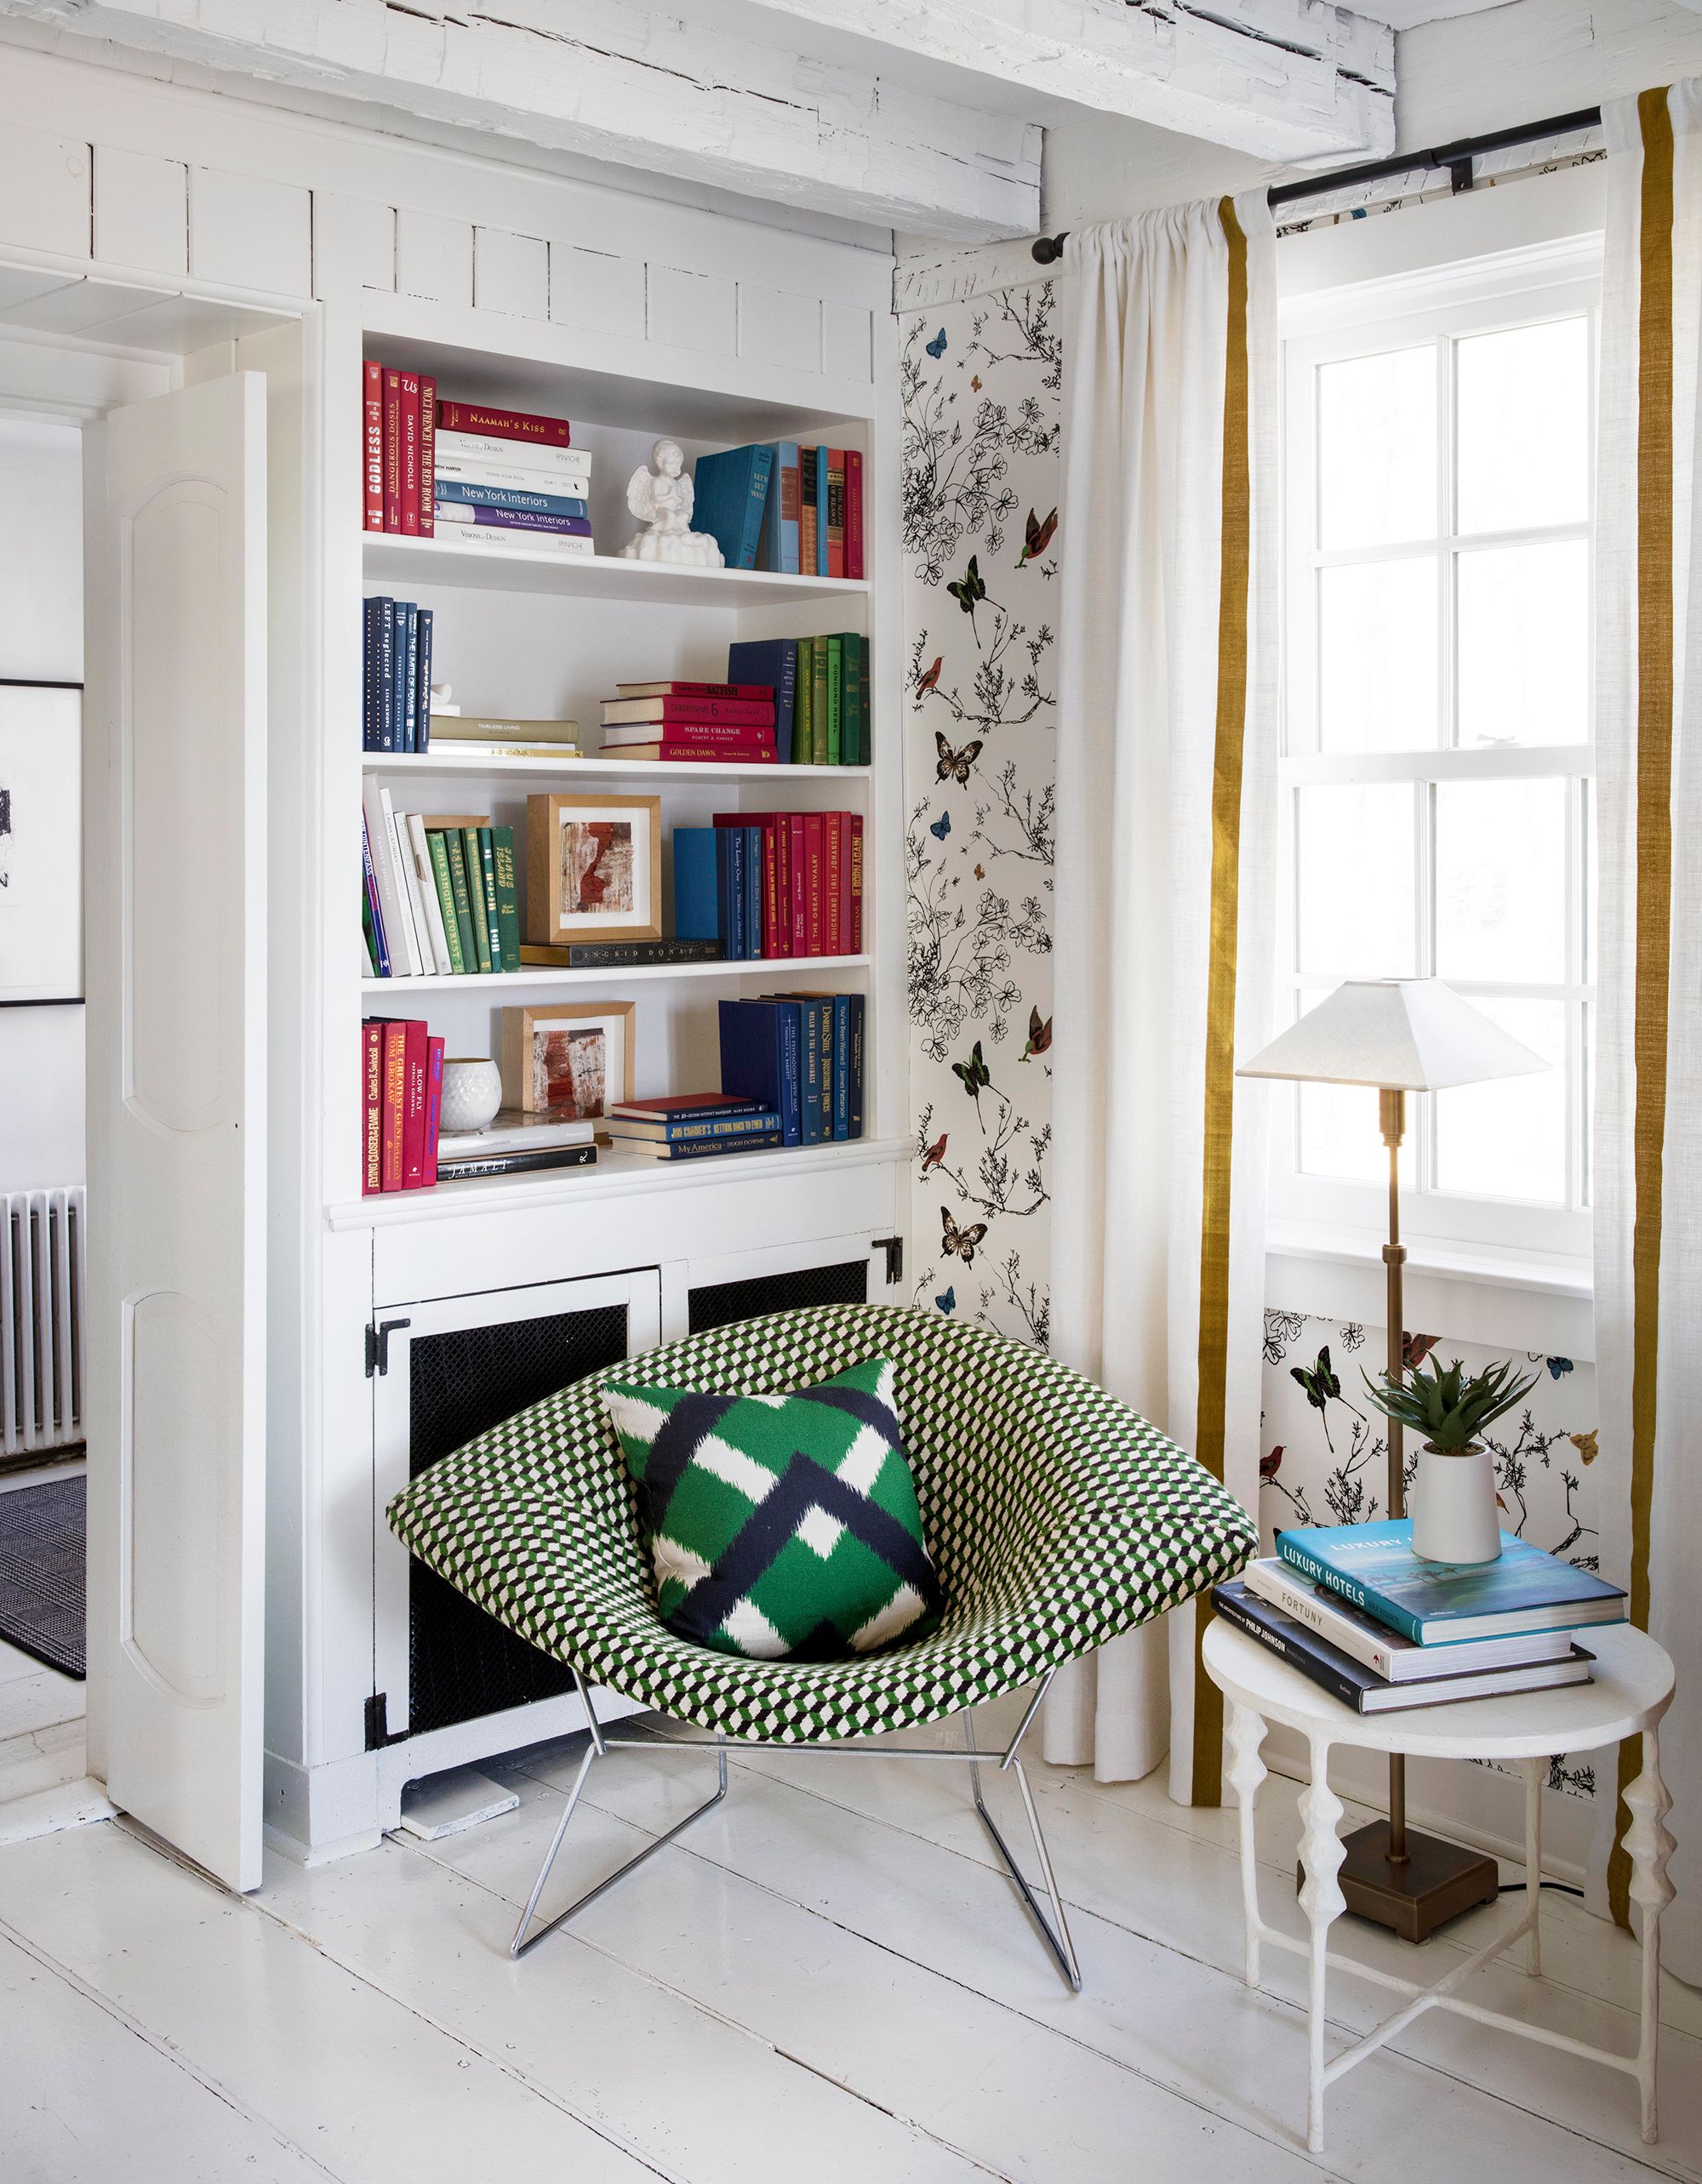 Home Library Ideas For Small Spaces / Cozy Reading Room Ideas 15